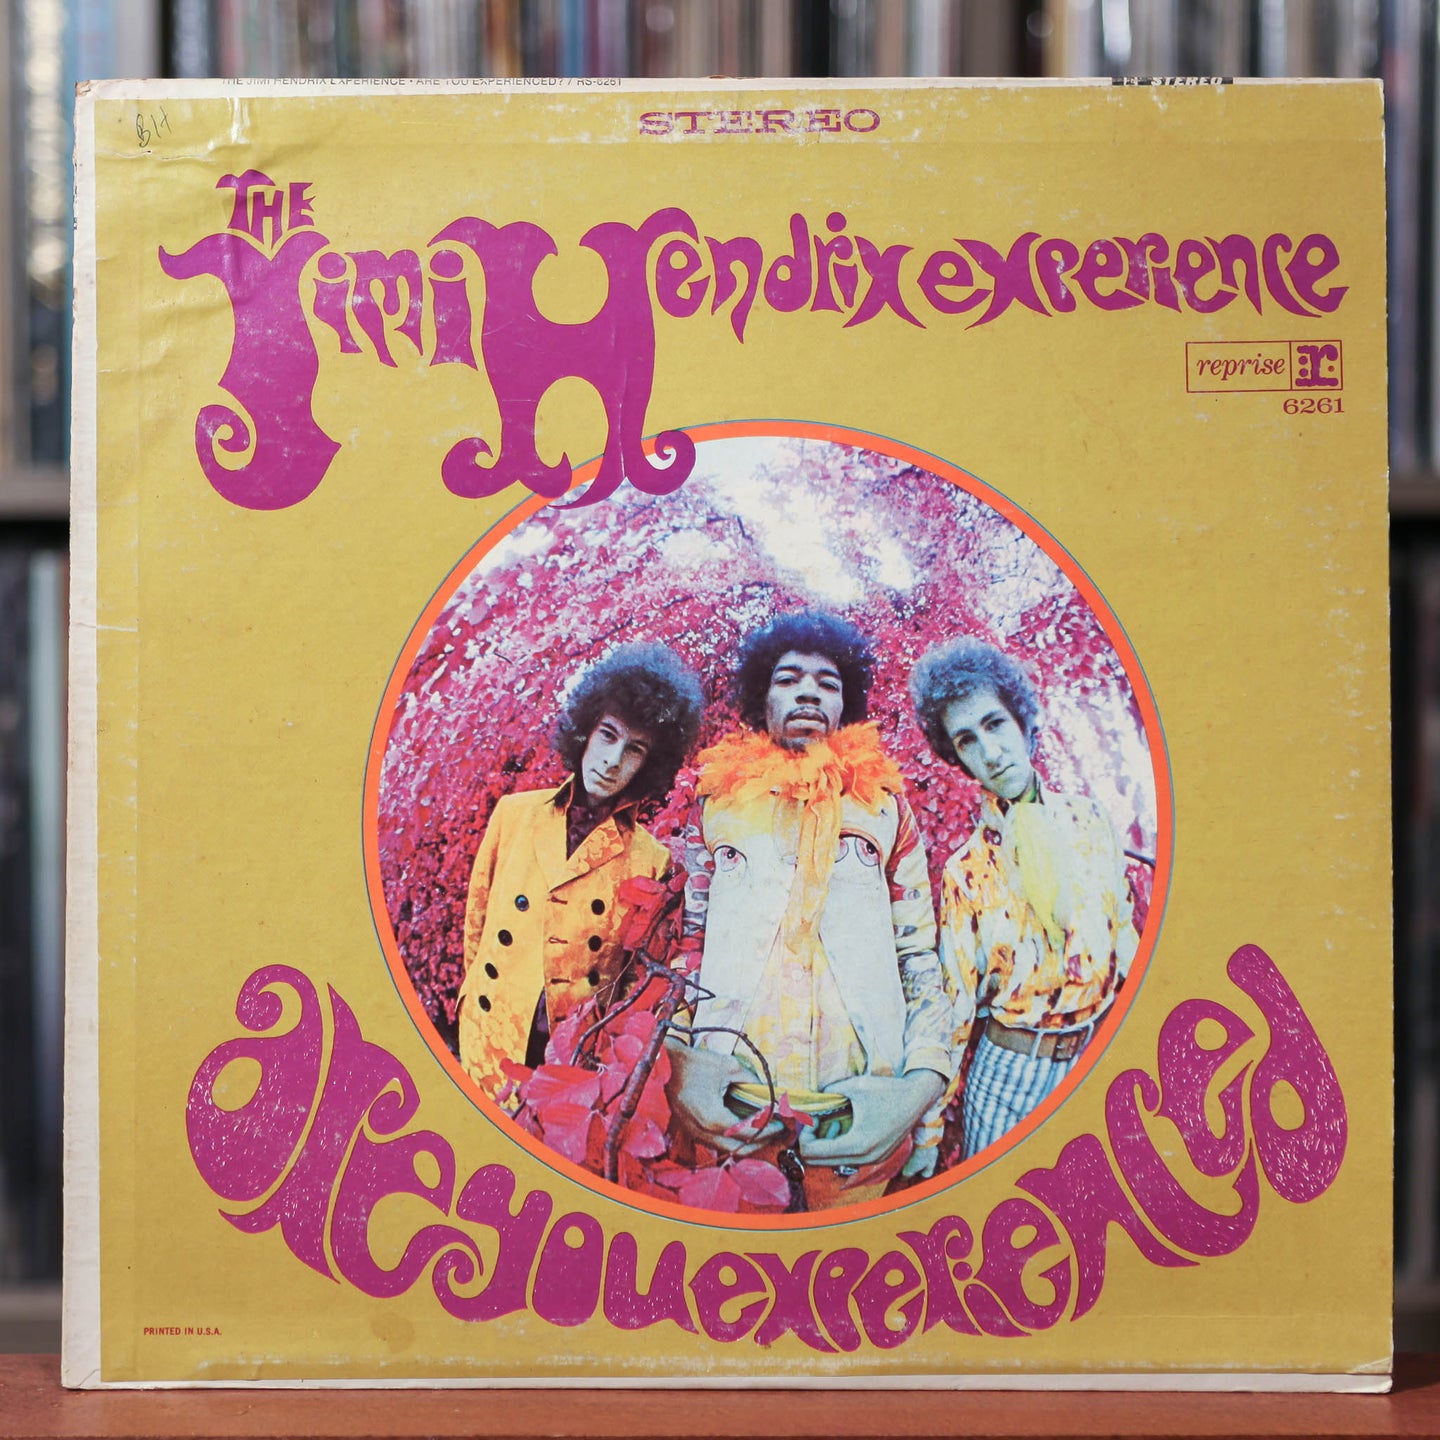 Jimi Hendrix - Are You Experienced - 1977 Reprise, VG+/VG